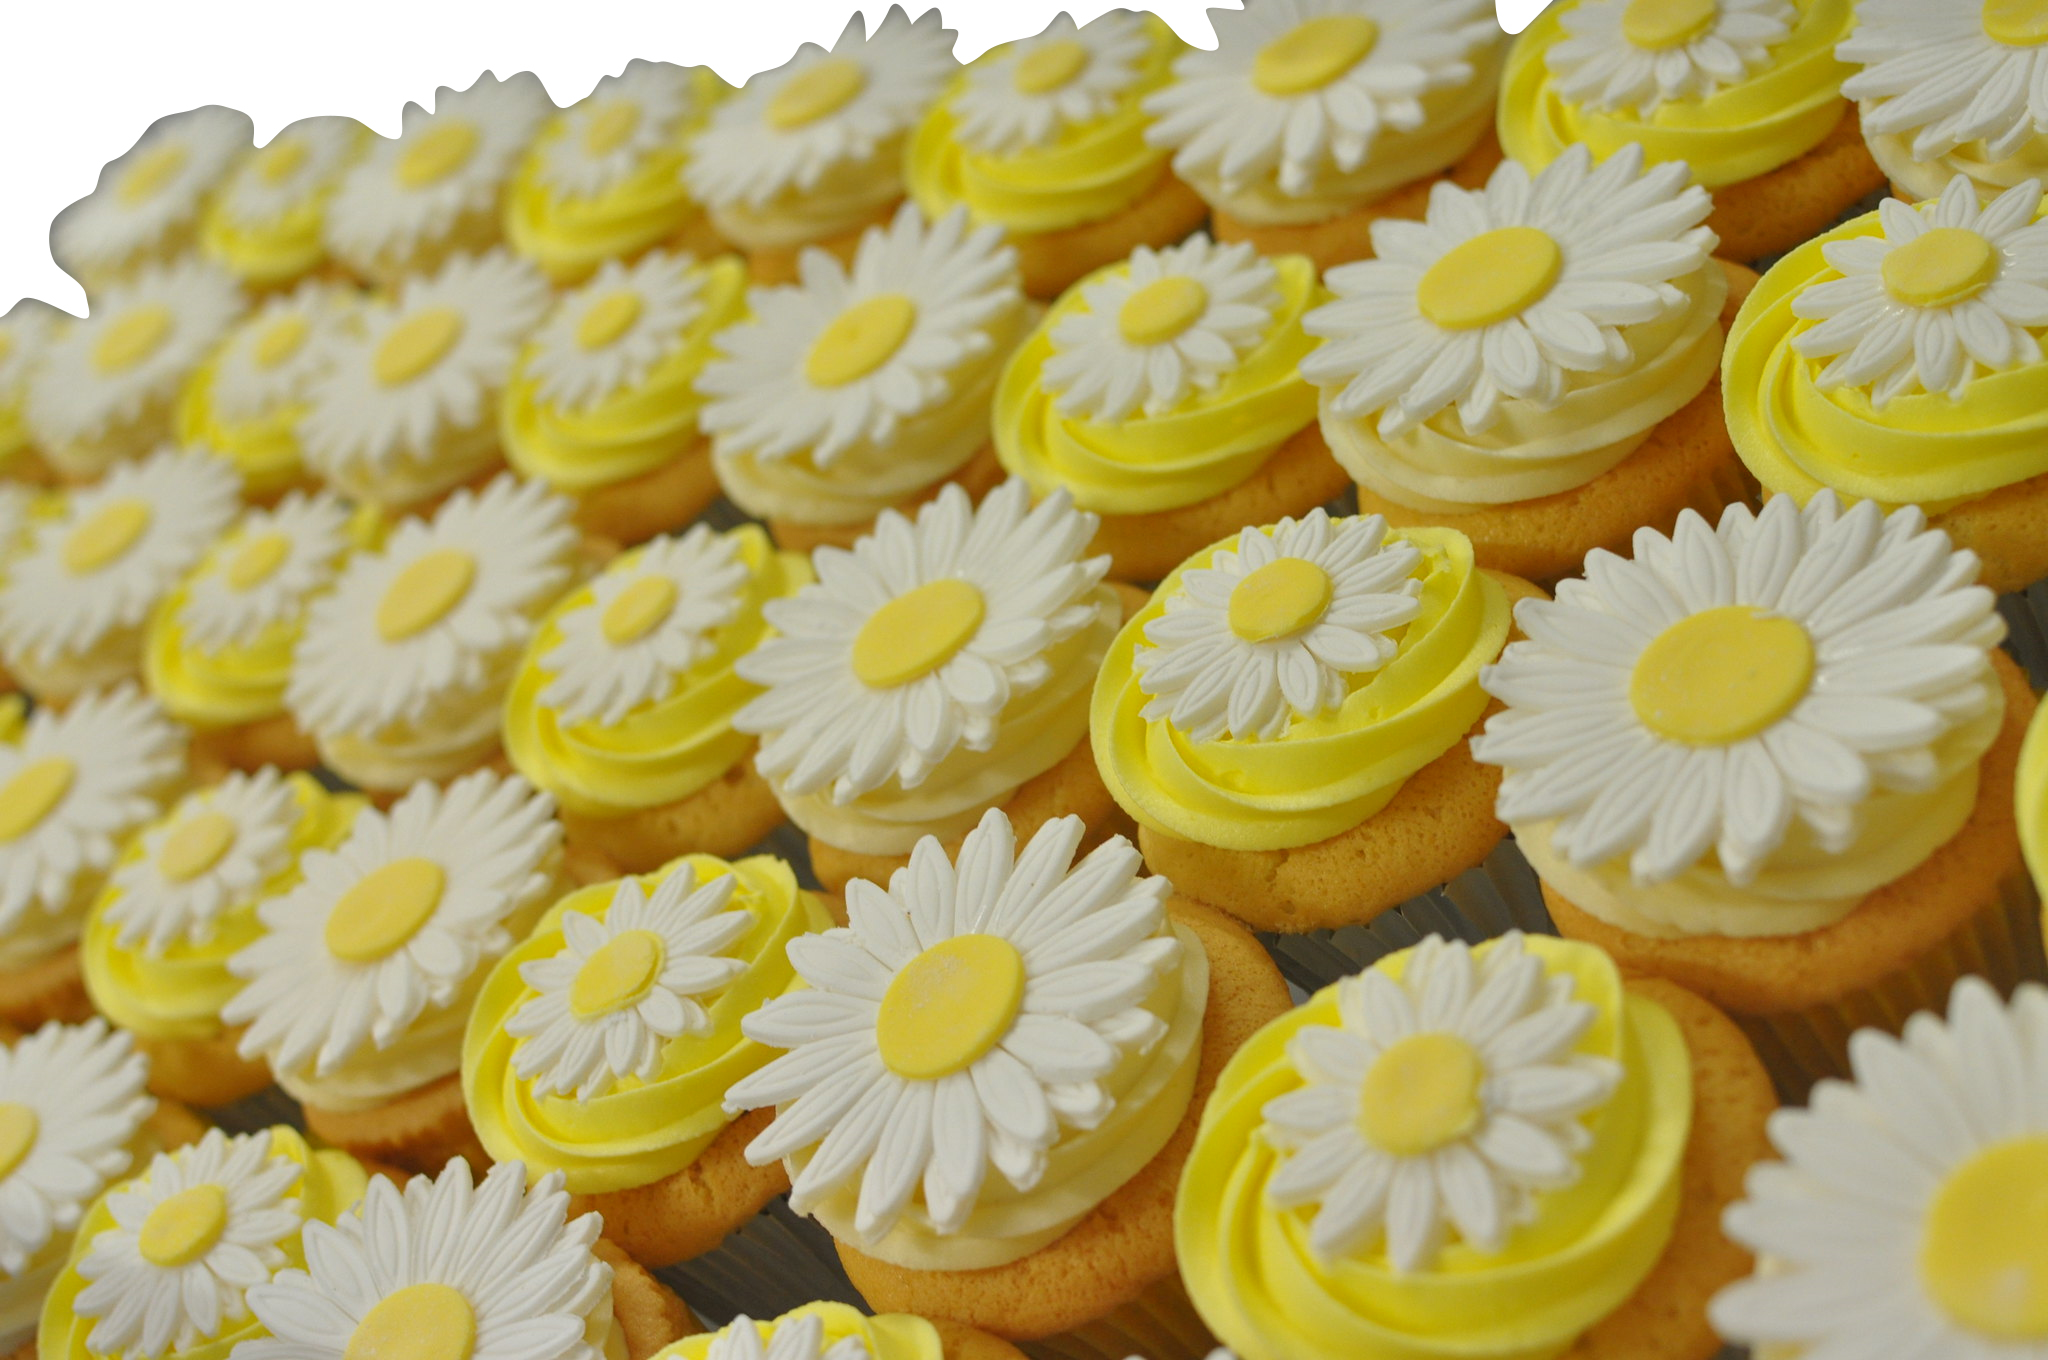 Sunflower Theme Cupcakes - Pack of 6